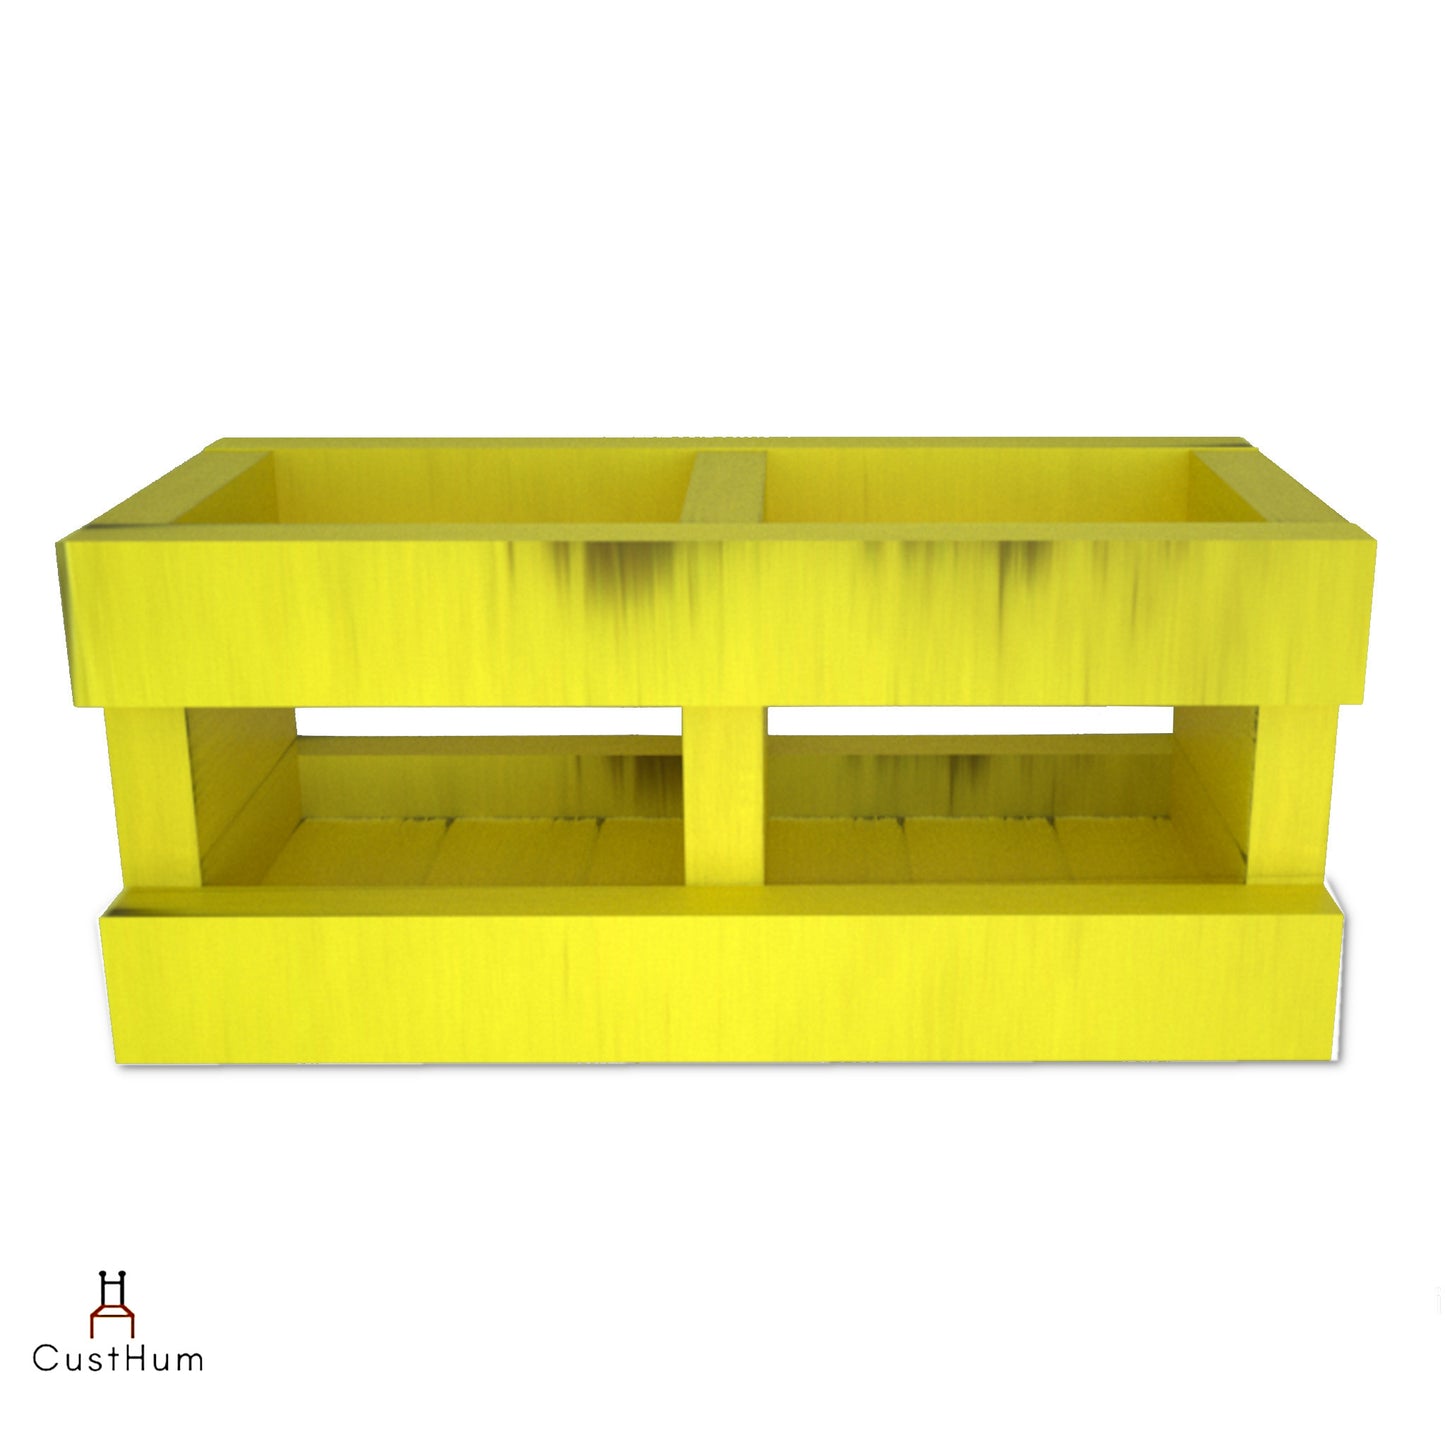 CustHum-Essen-wooden cutlery and condiments holder-distressed yellow-front